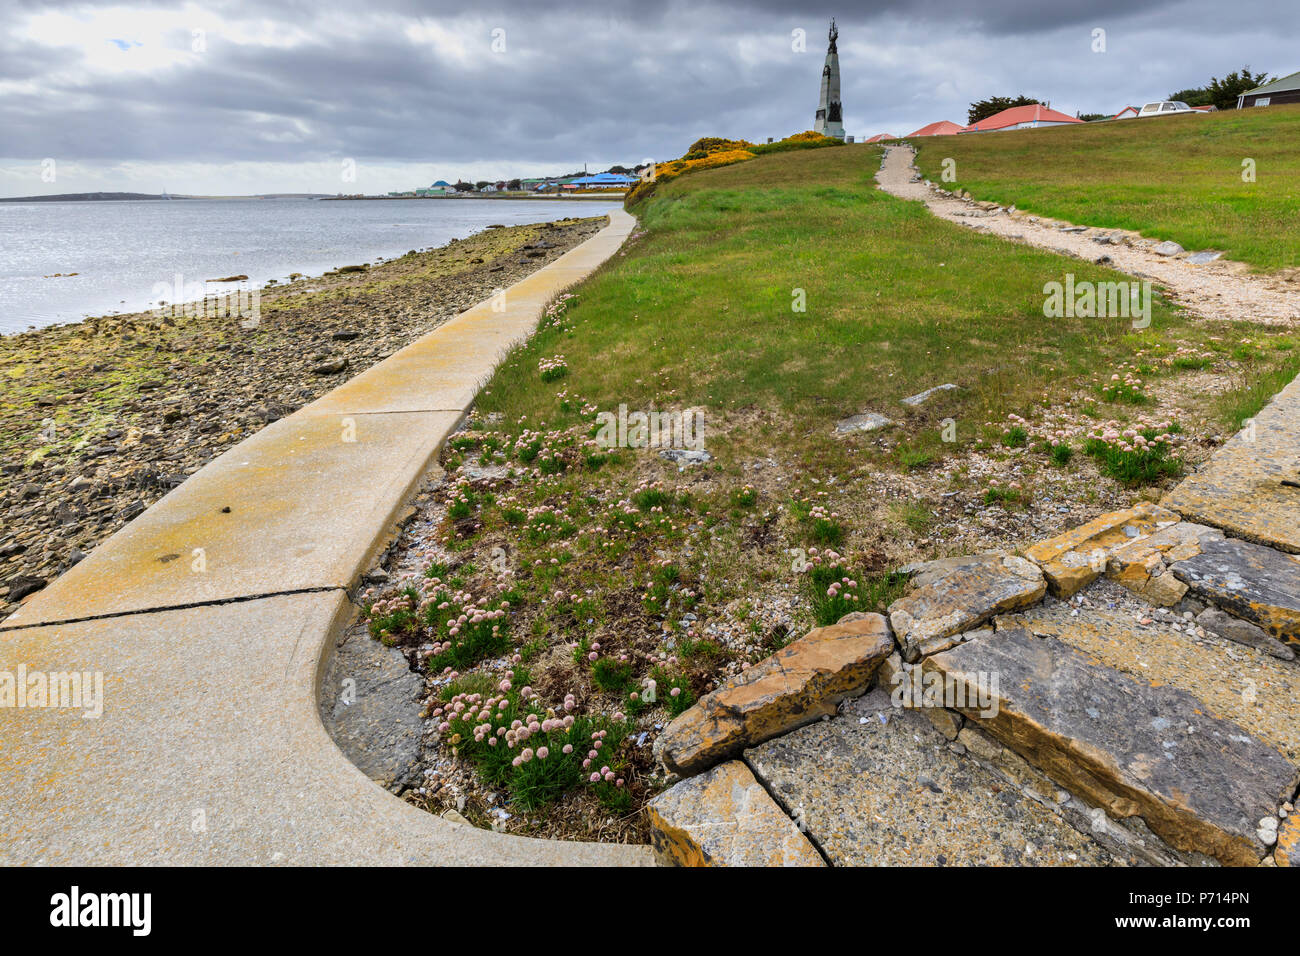 Thrift (Armeria maritima), 1914 Battle of the Falklands Memorial, Stanley waterfront, Port Stanley, Falkland Islands, South America Stock Photo